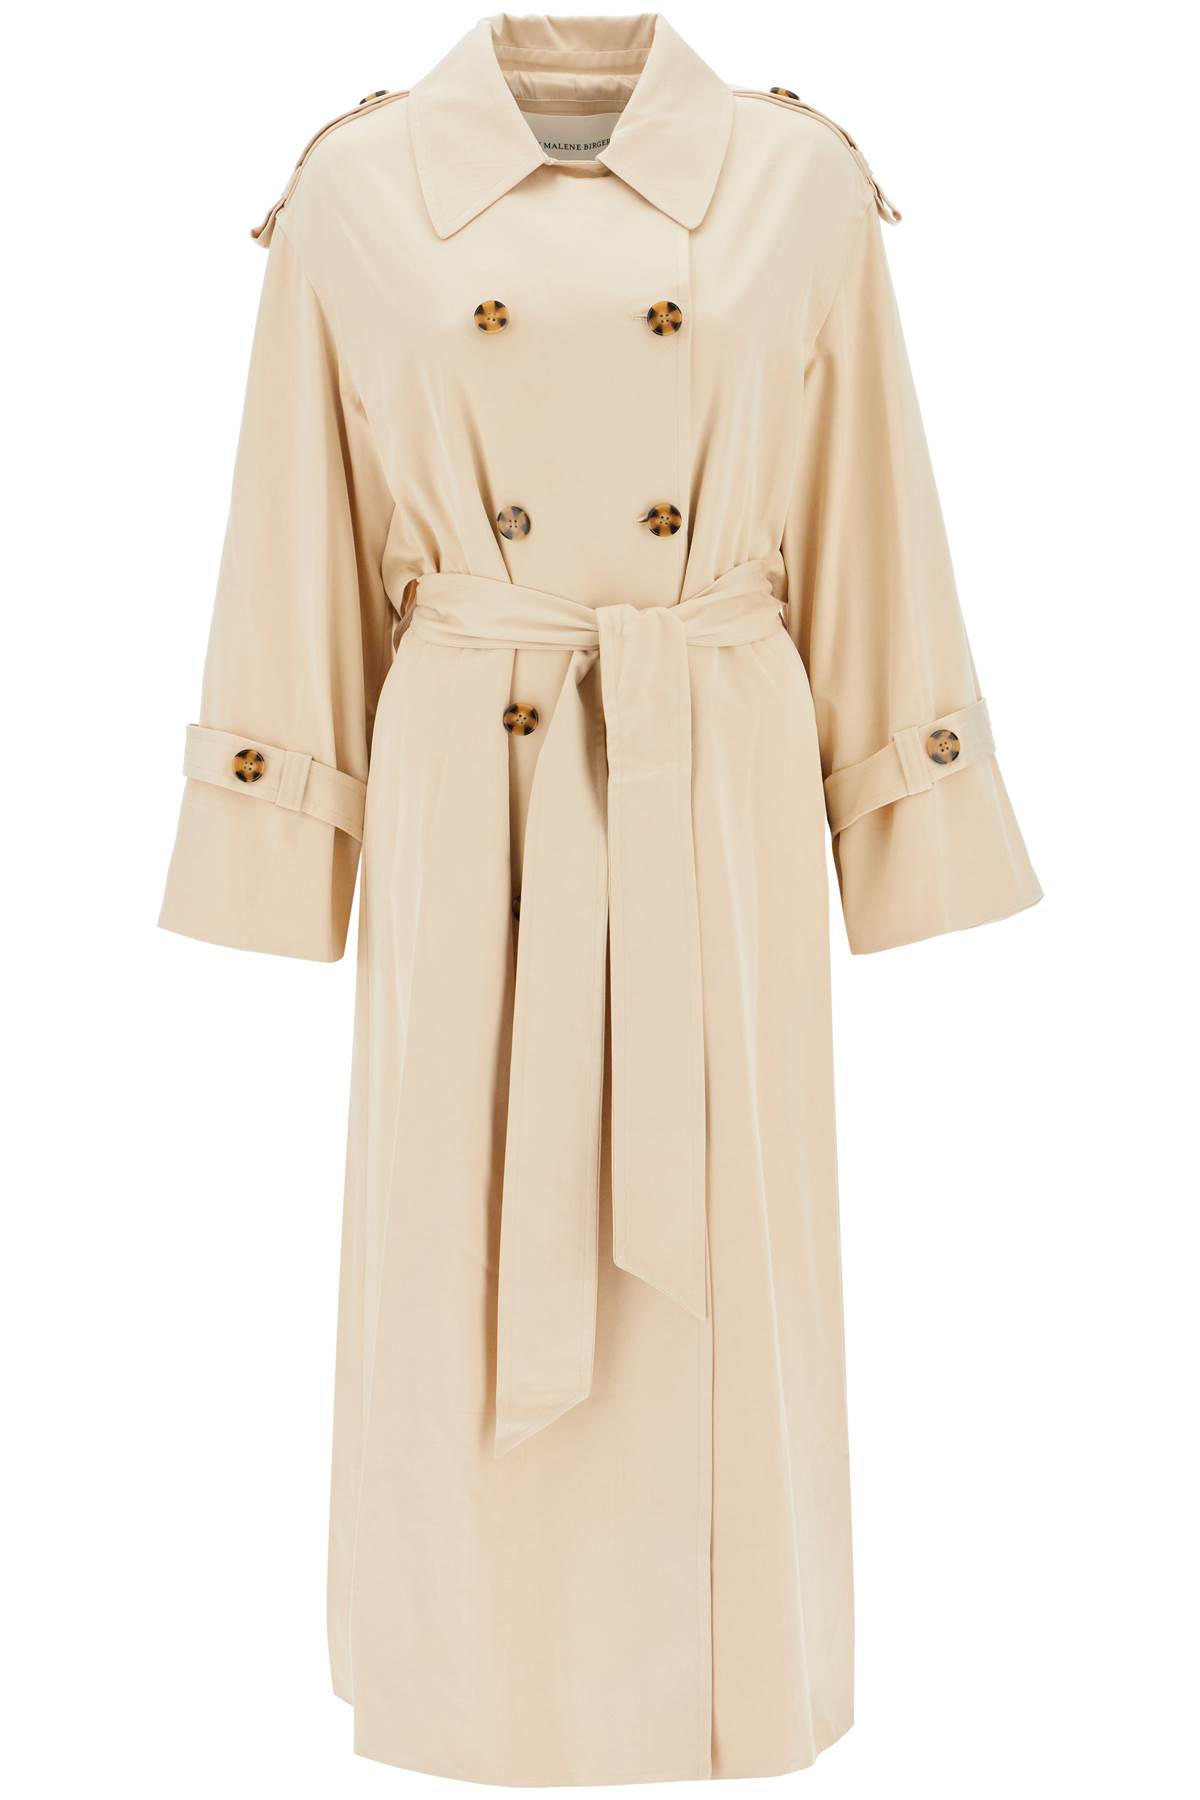 By Malene Birger alanis Double-breasted Trench Coat